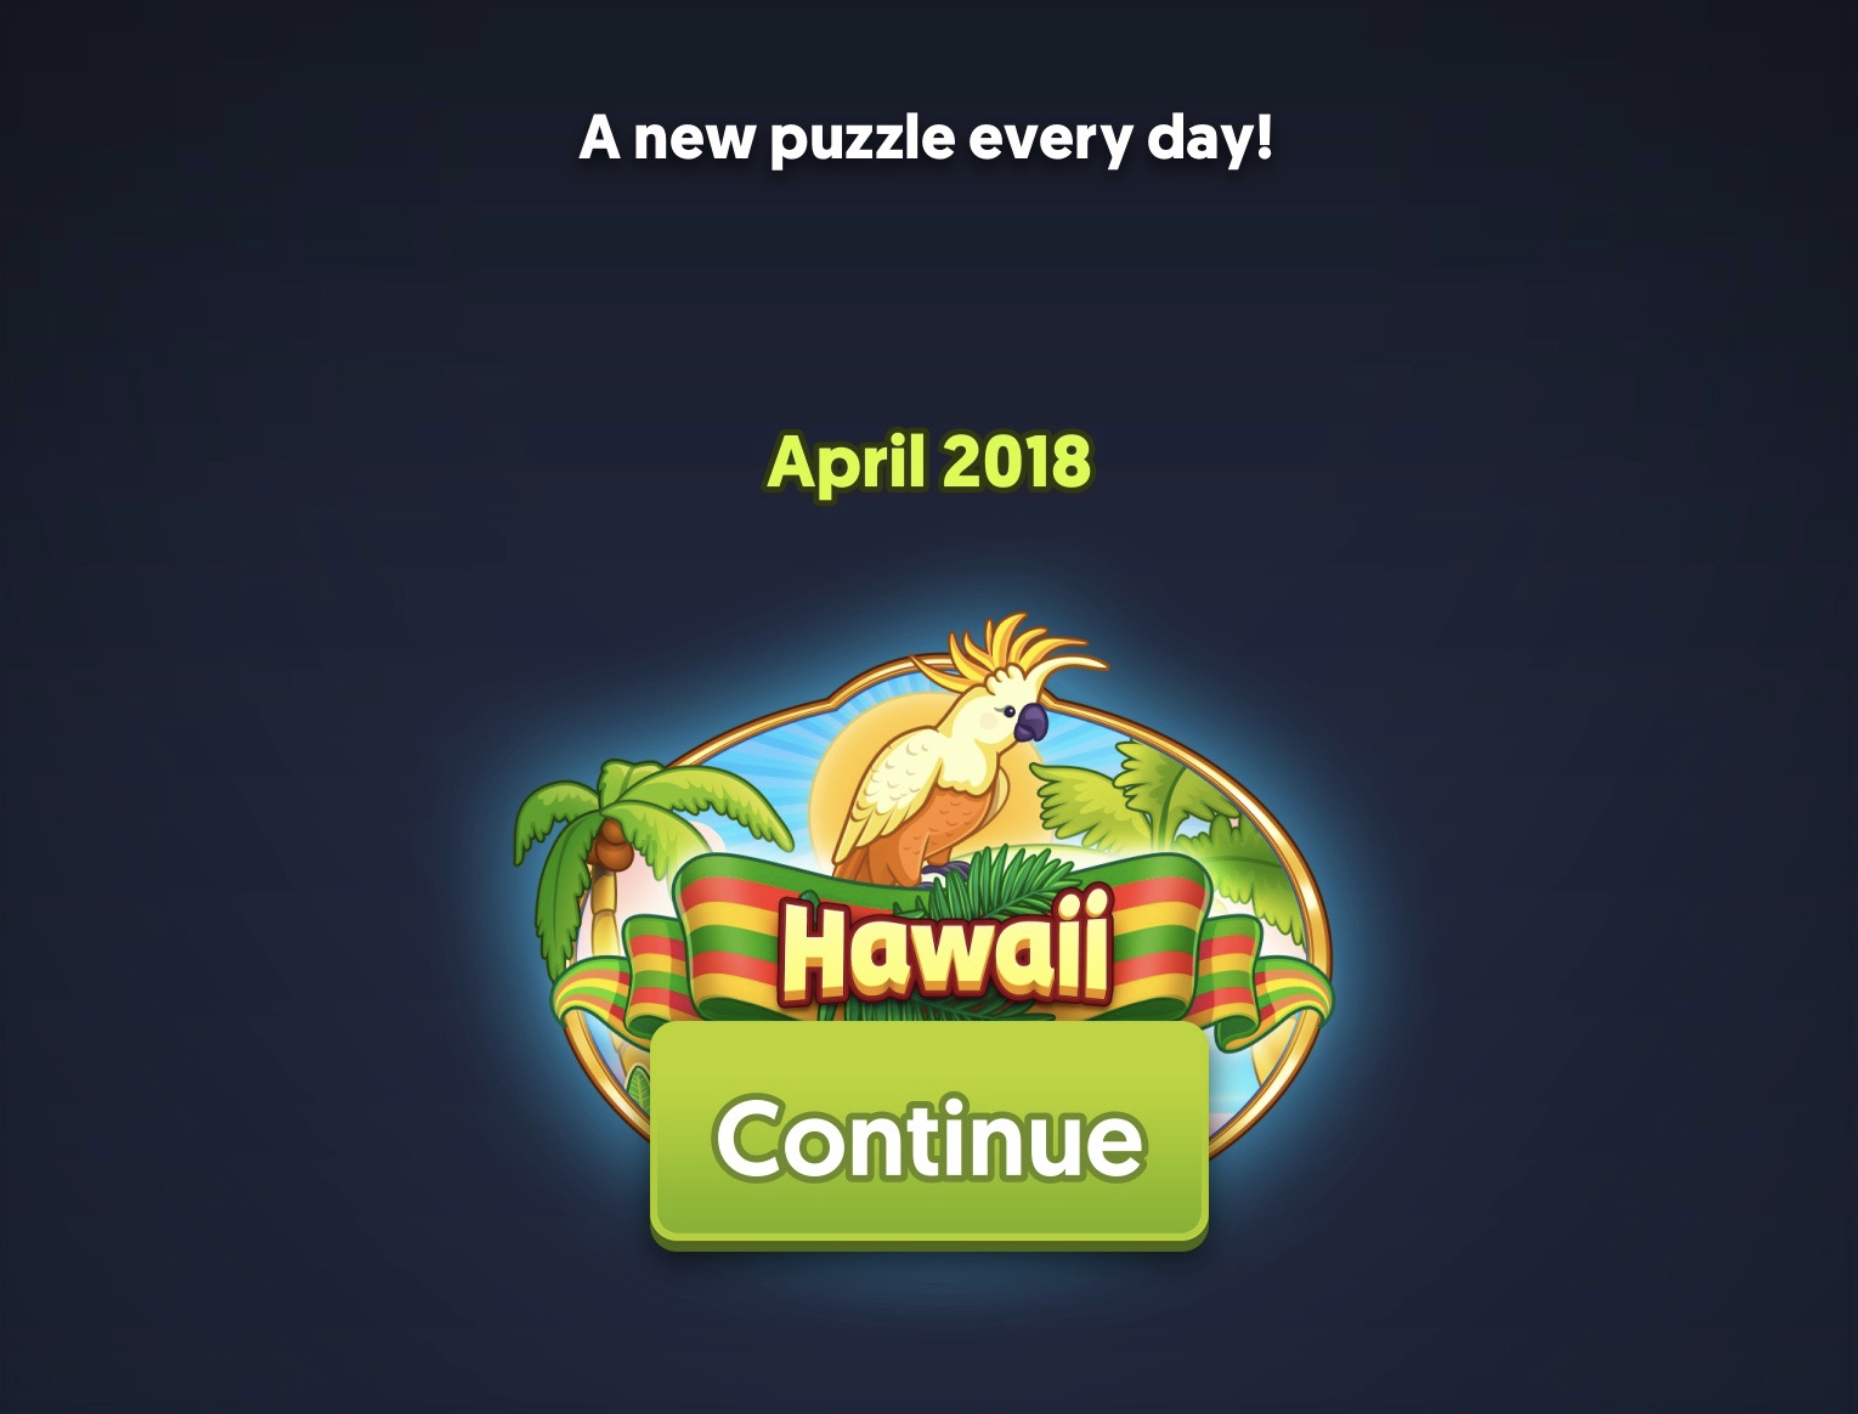 4 pics 1 word daily challenge august 3 2017